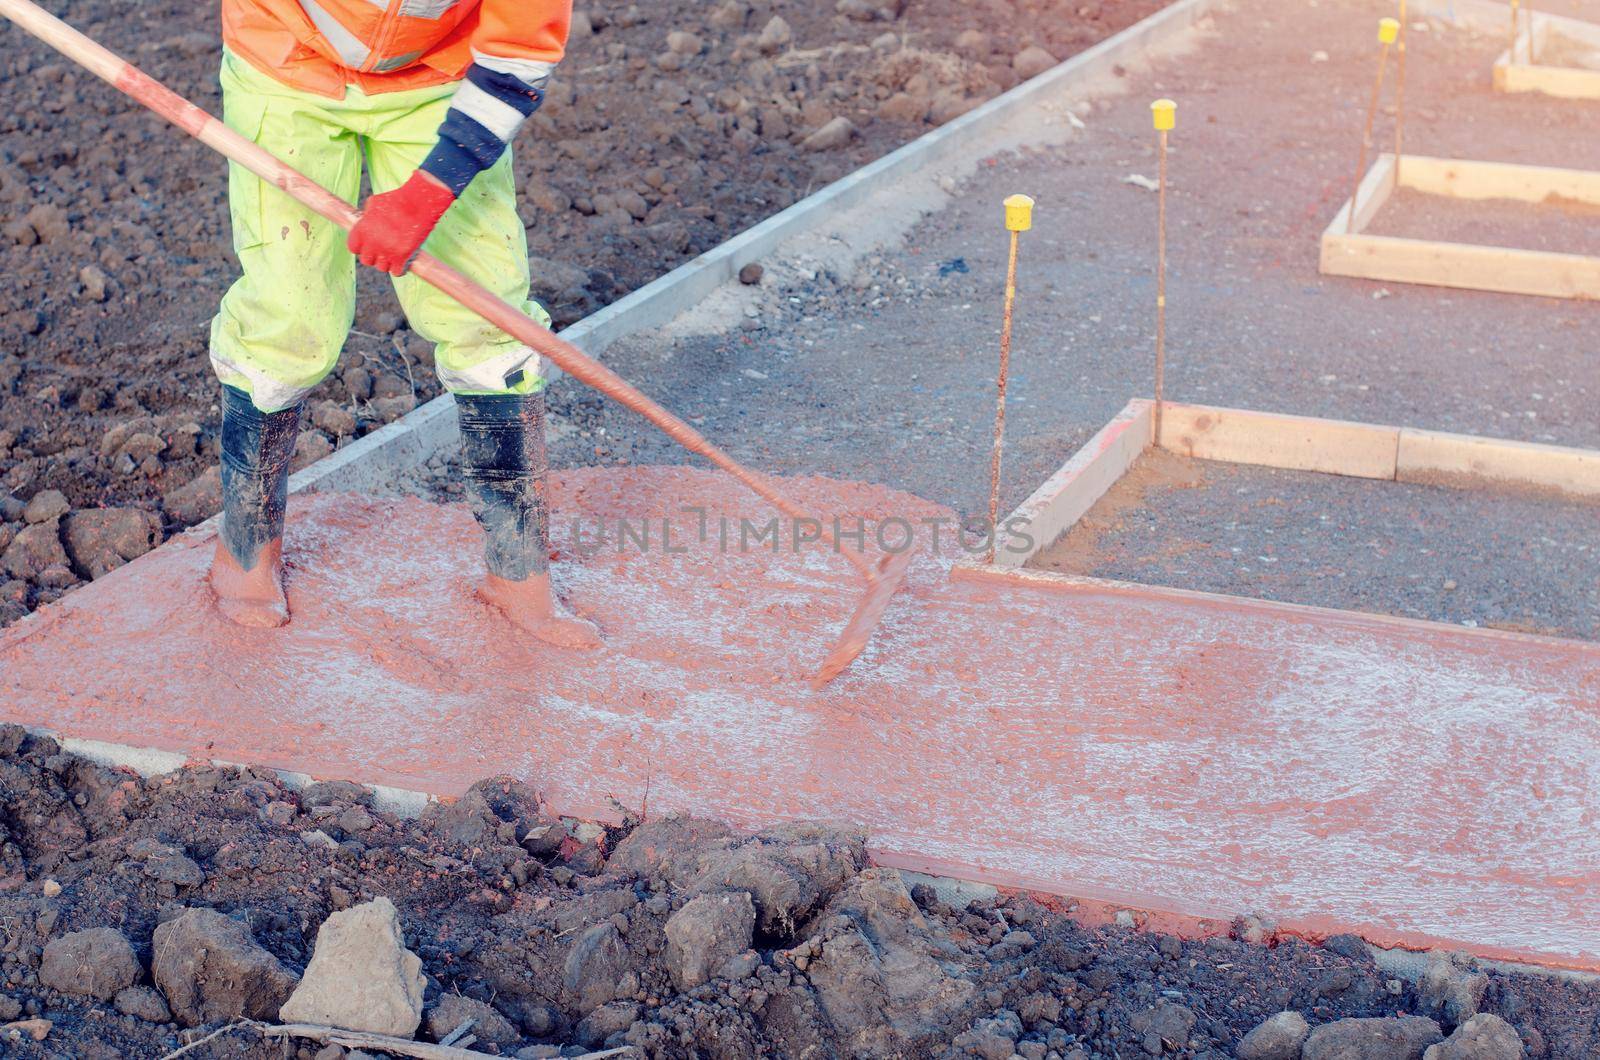 Concreter spreading poured concrete with a rake or spazzle A construction worker is levelling tinted concrete in formwork